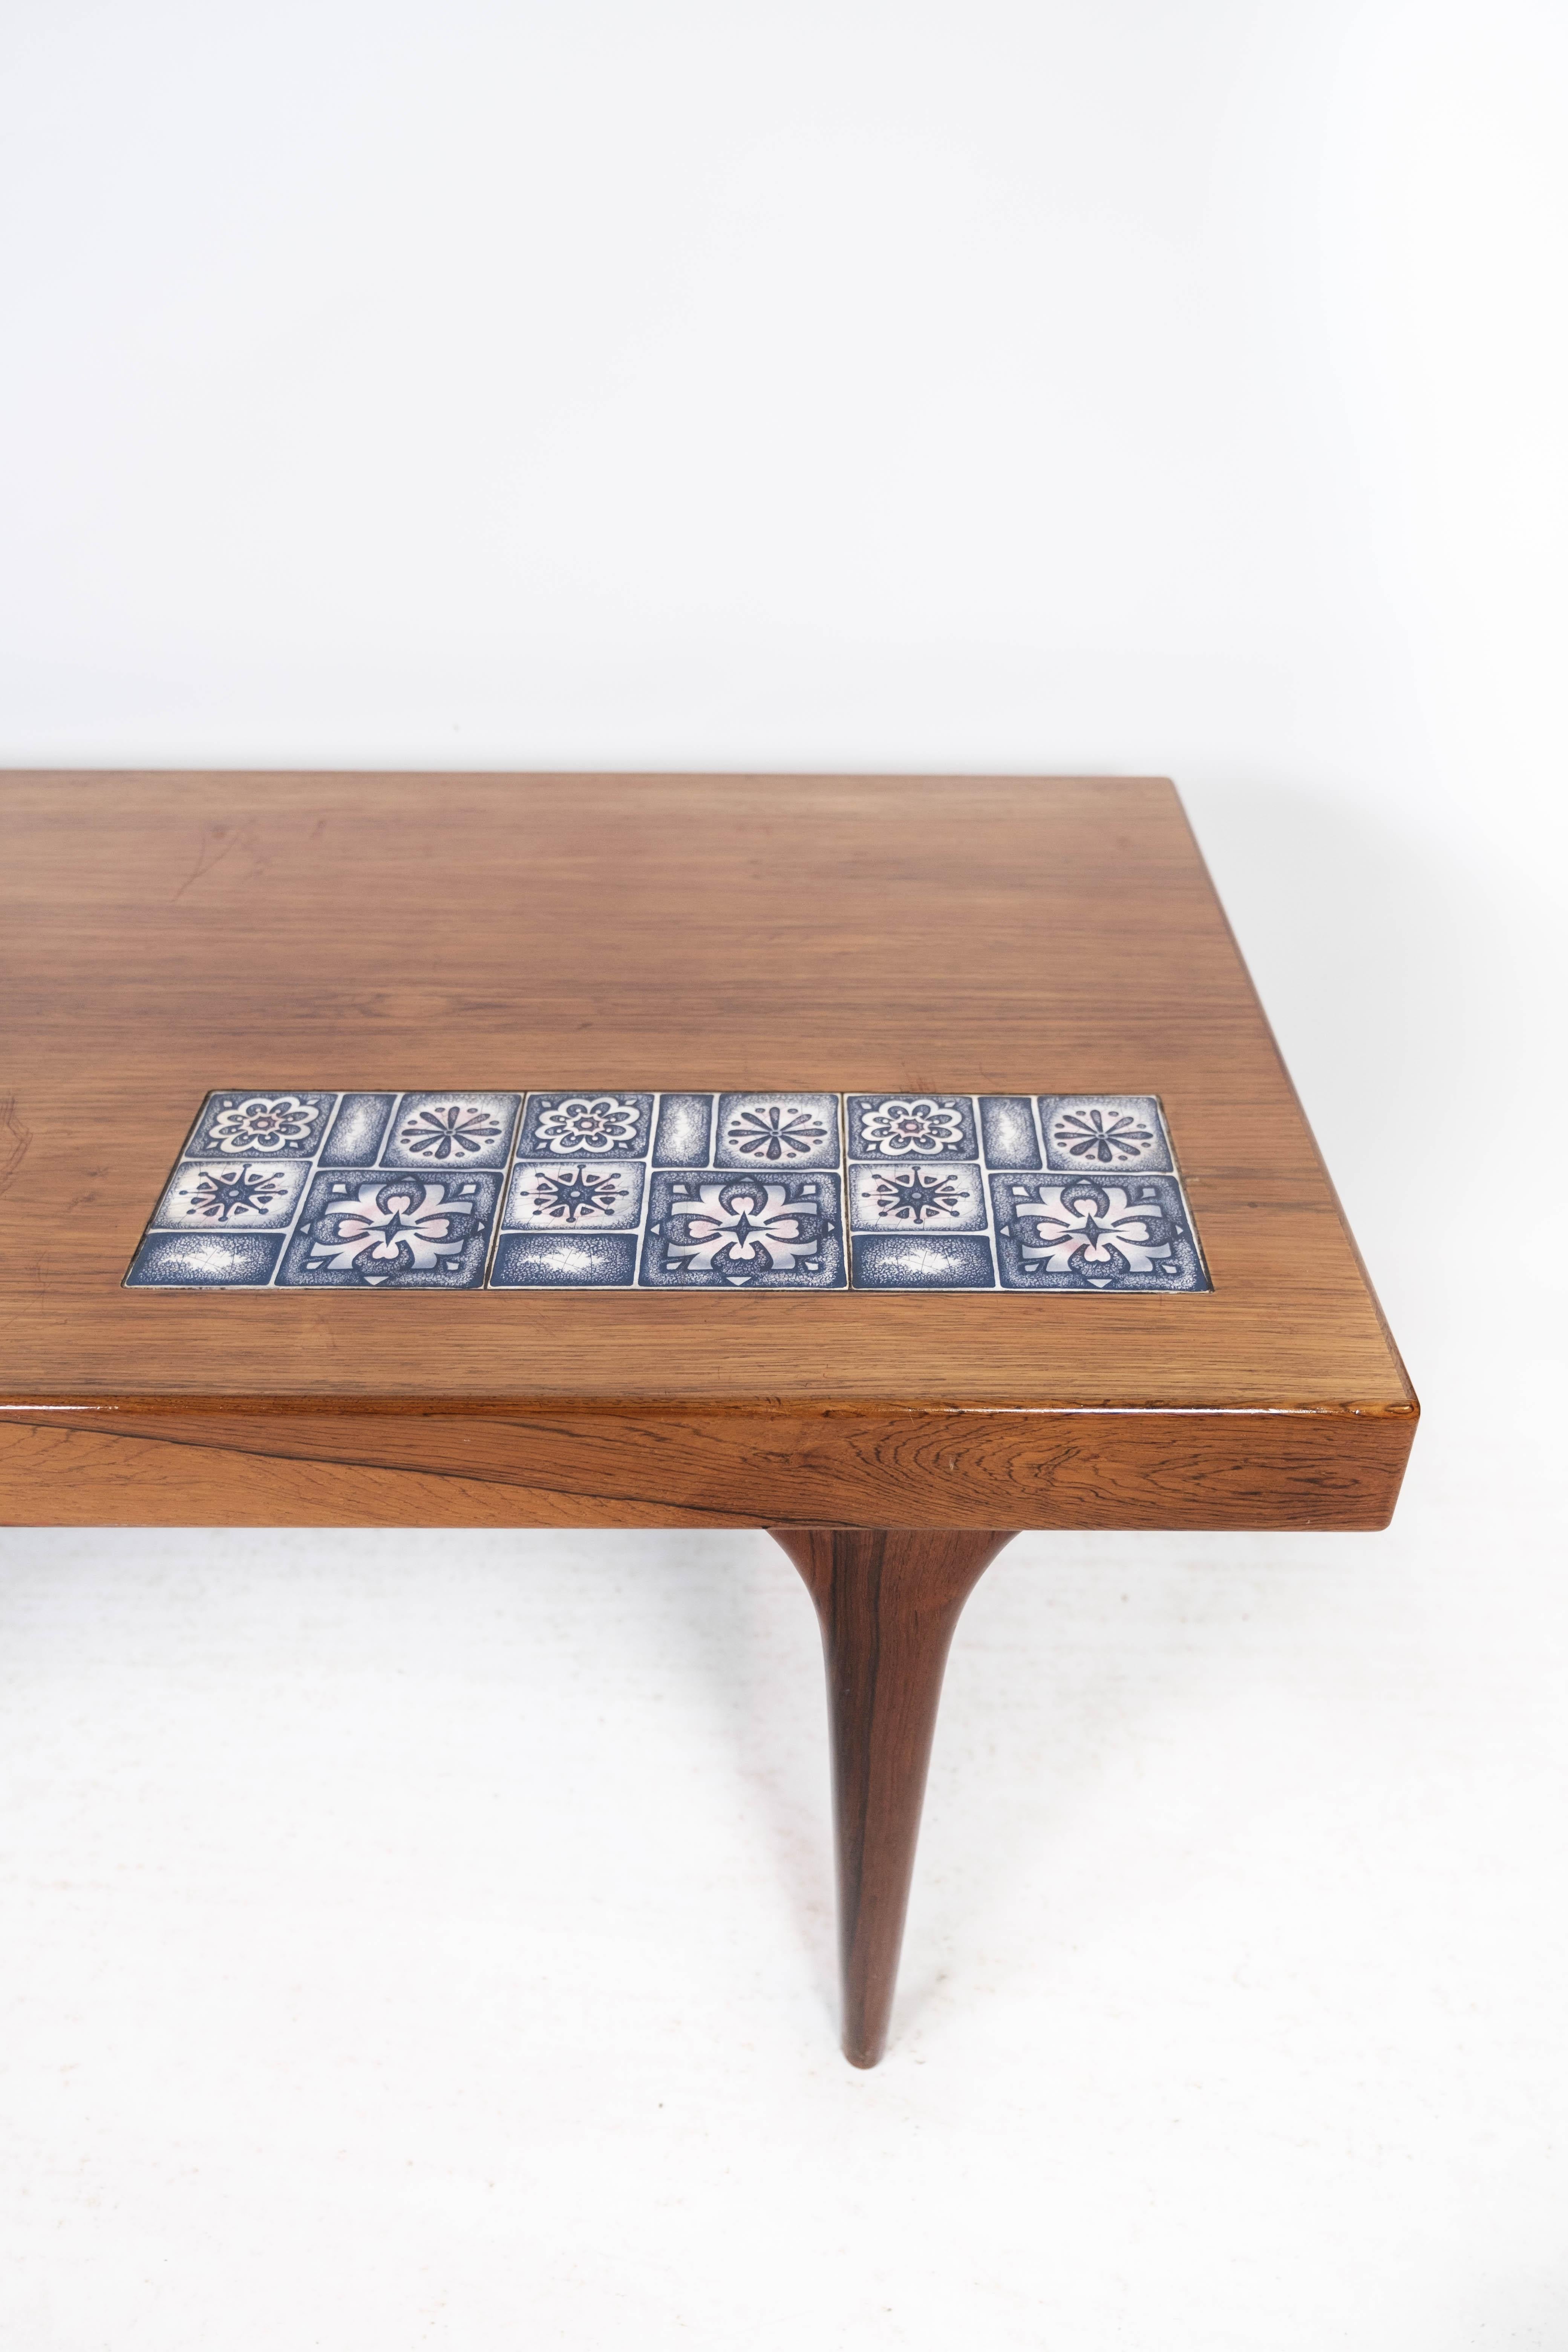 Mid-Century Modern Coffee Table Made In Rosewood With Blue Tiles By Johannes Andersen From 1960s For Sale